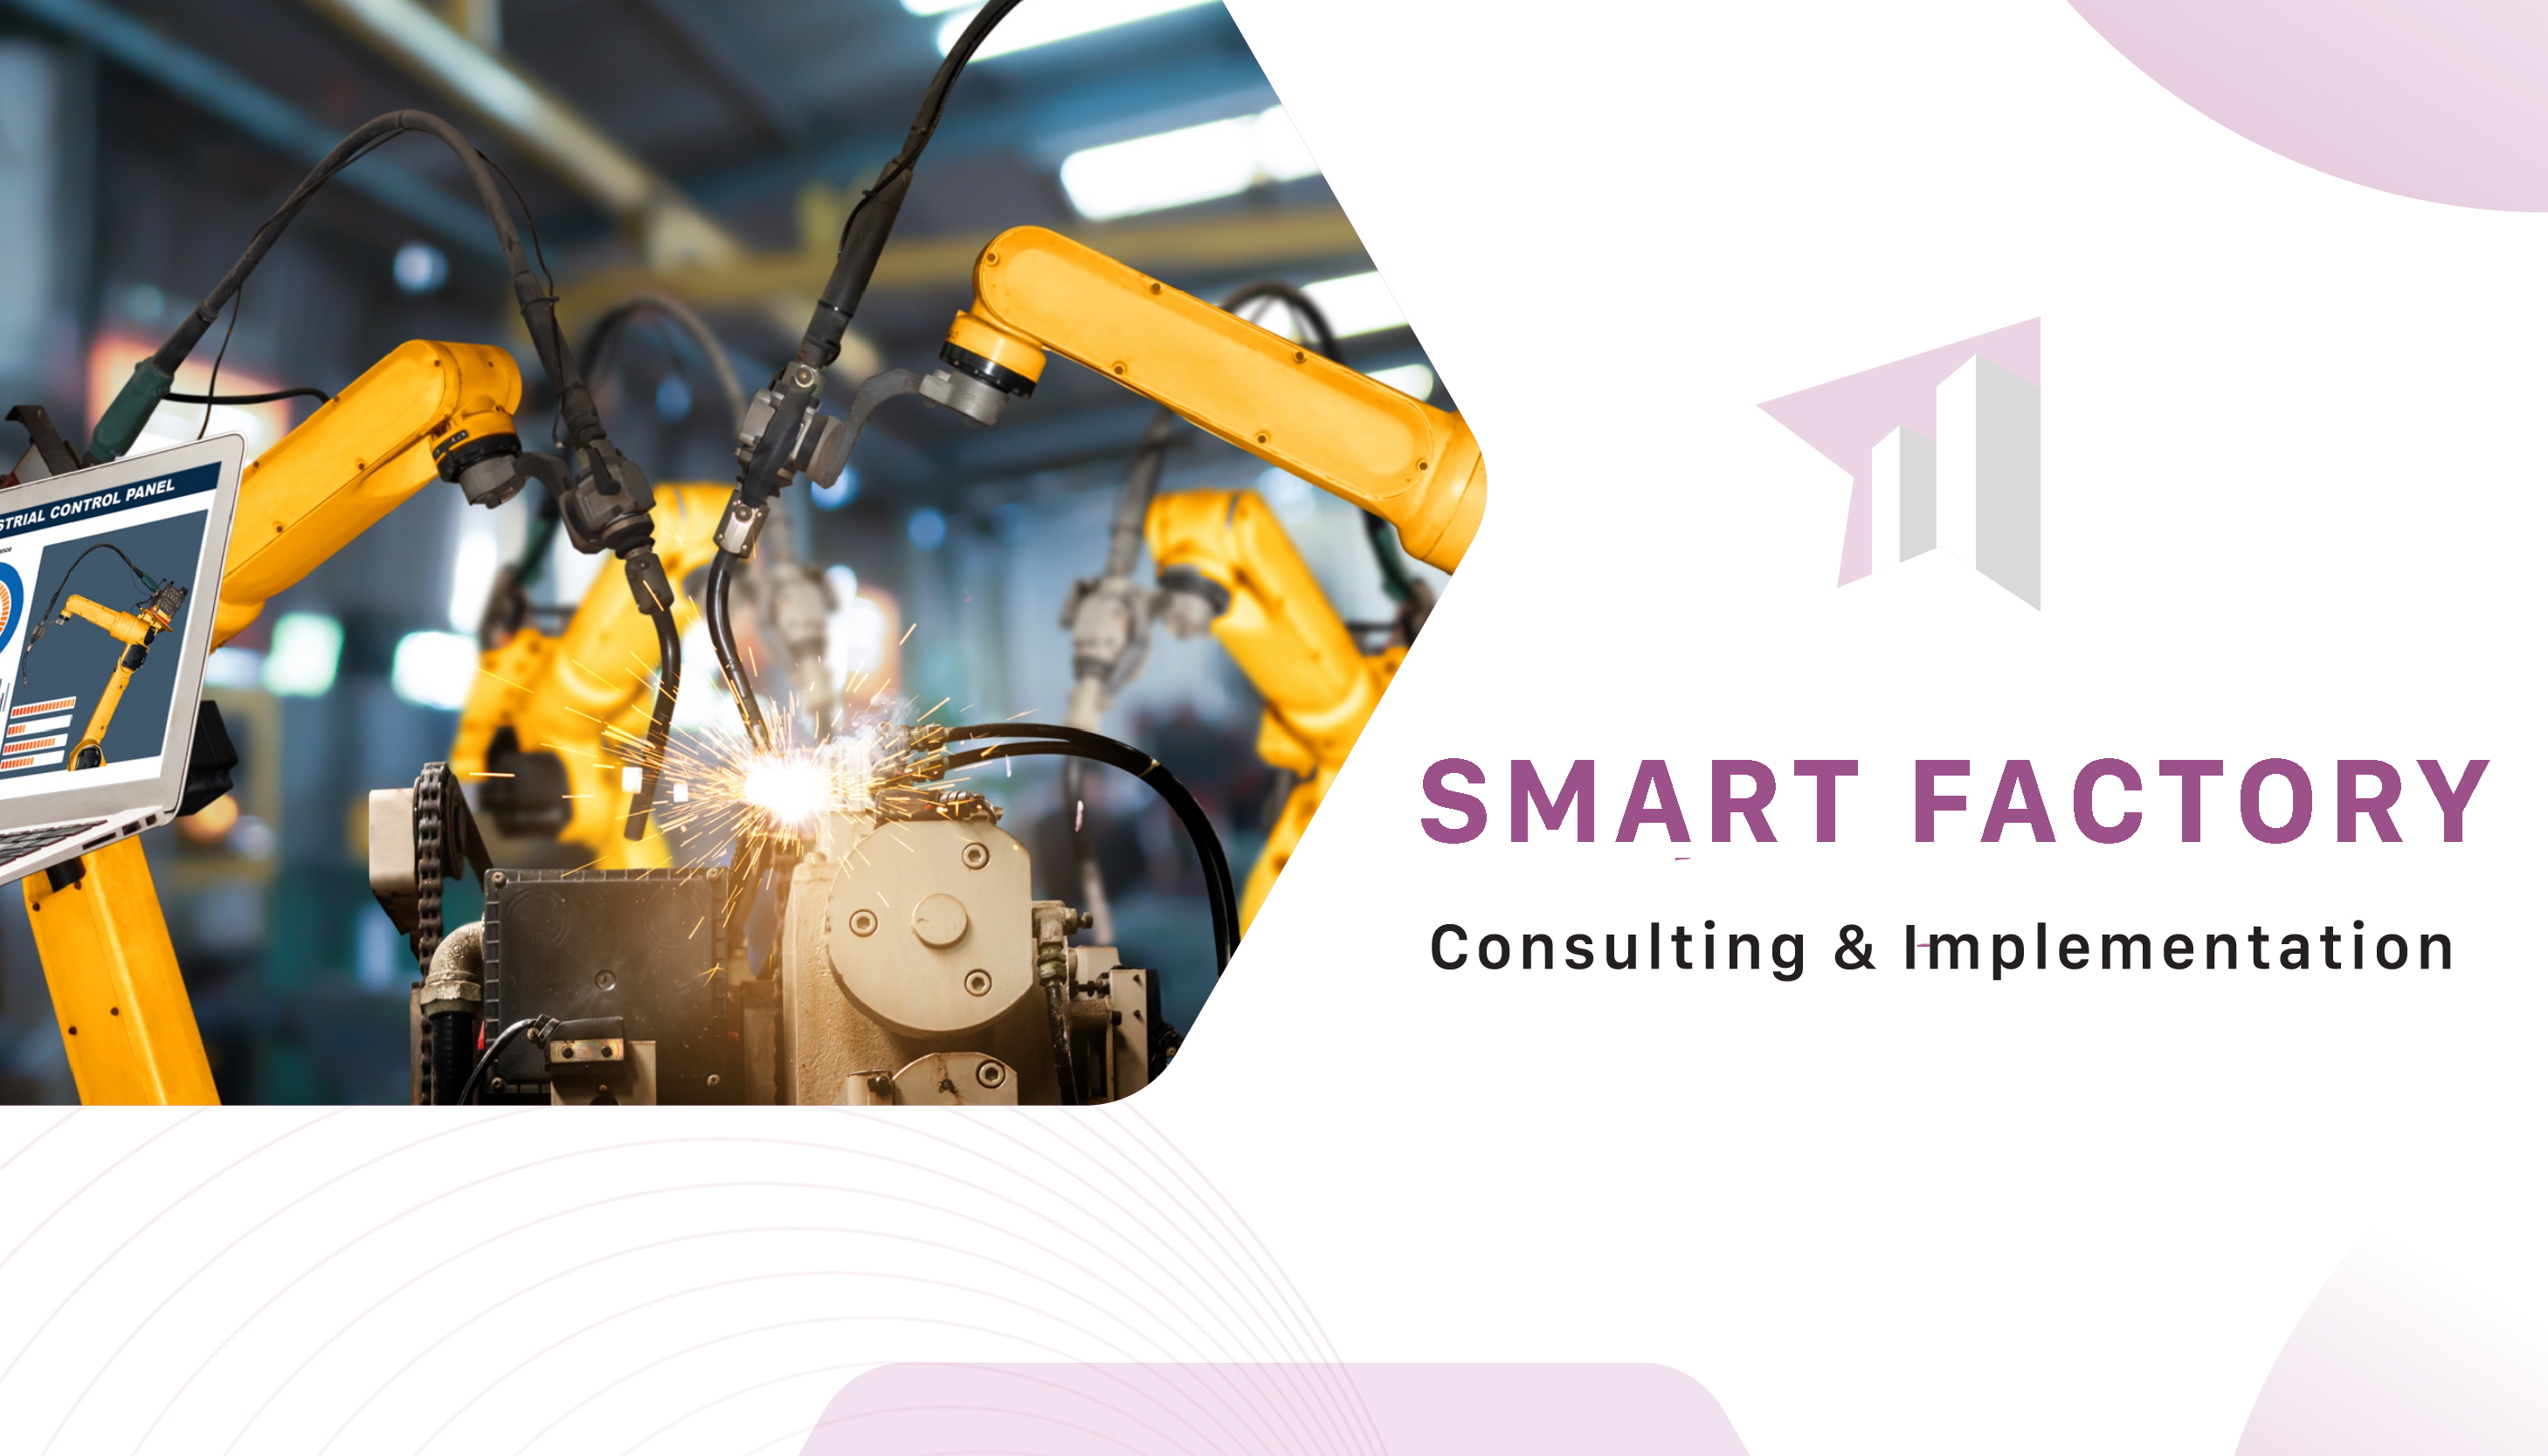 Smart Factory Consulting & Implementation